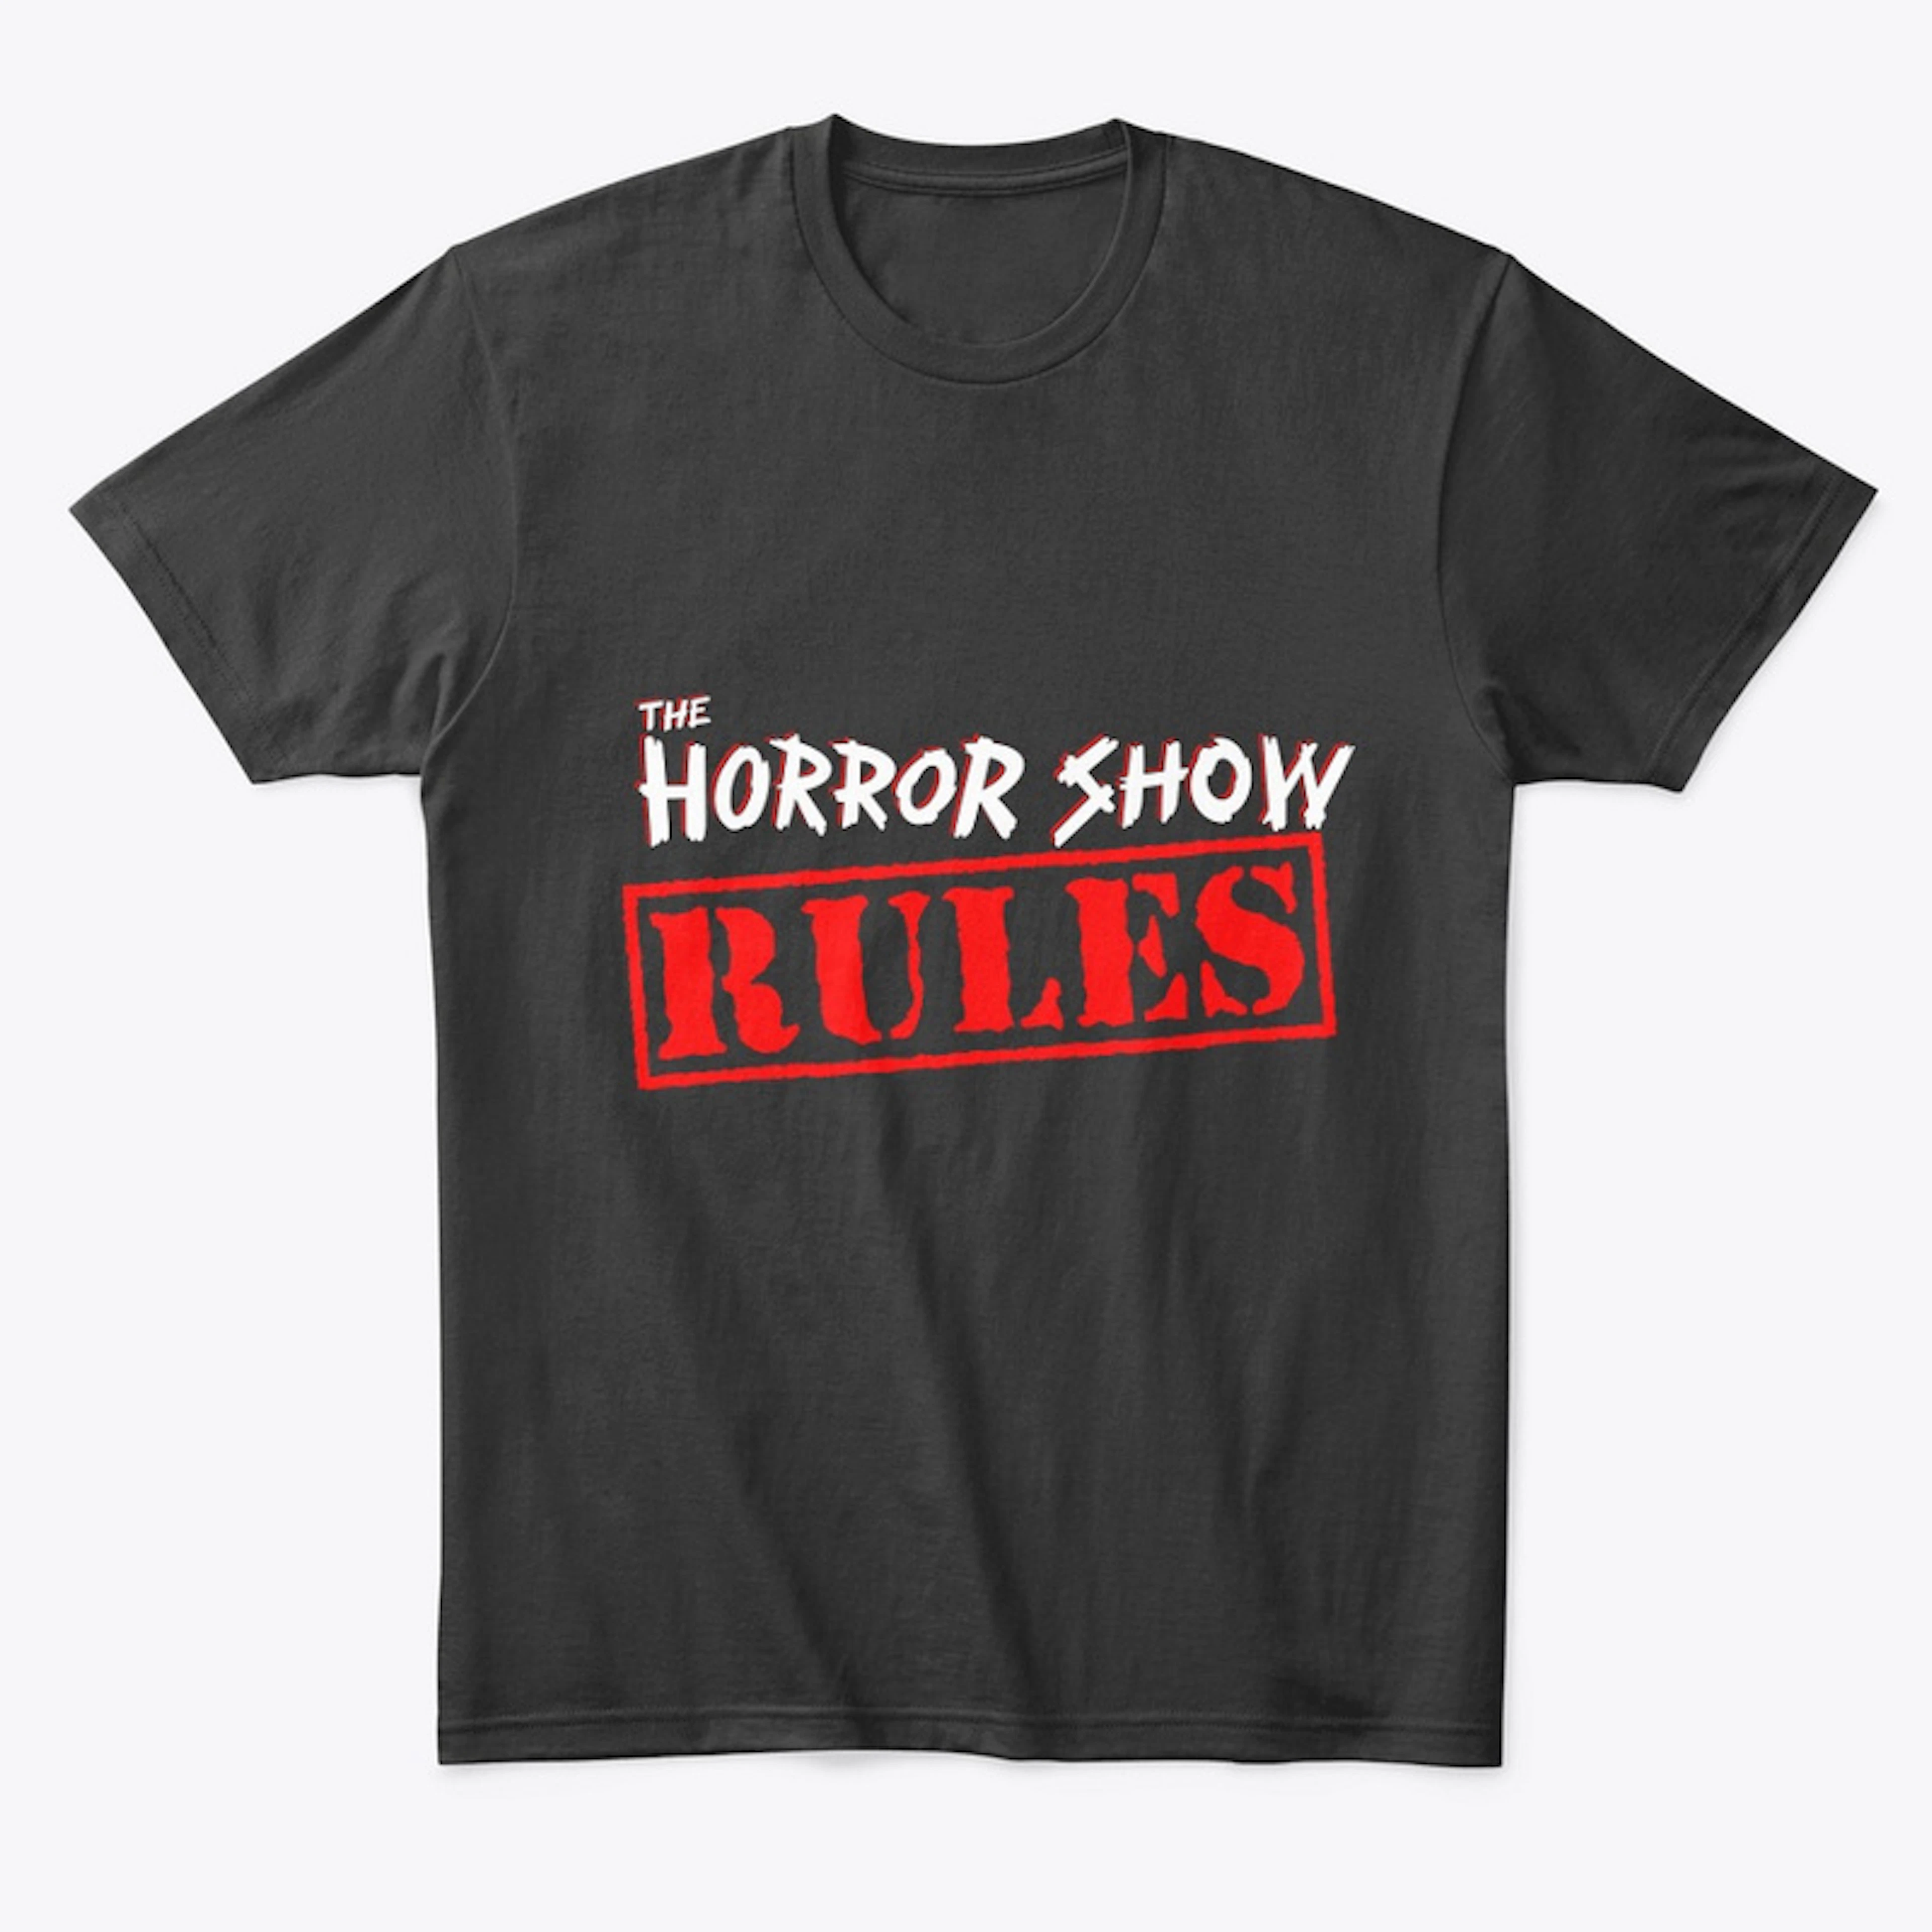 The Horror Show Rules - Der uh..TSHIRTS?